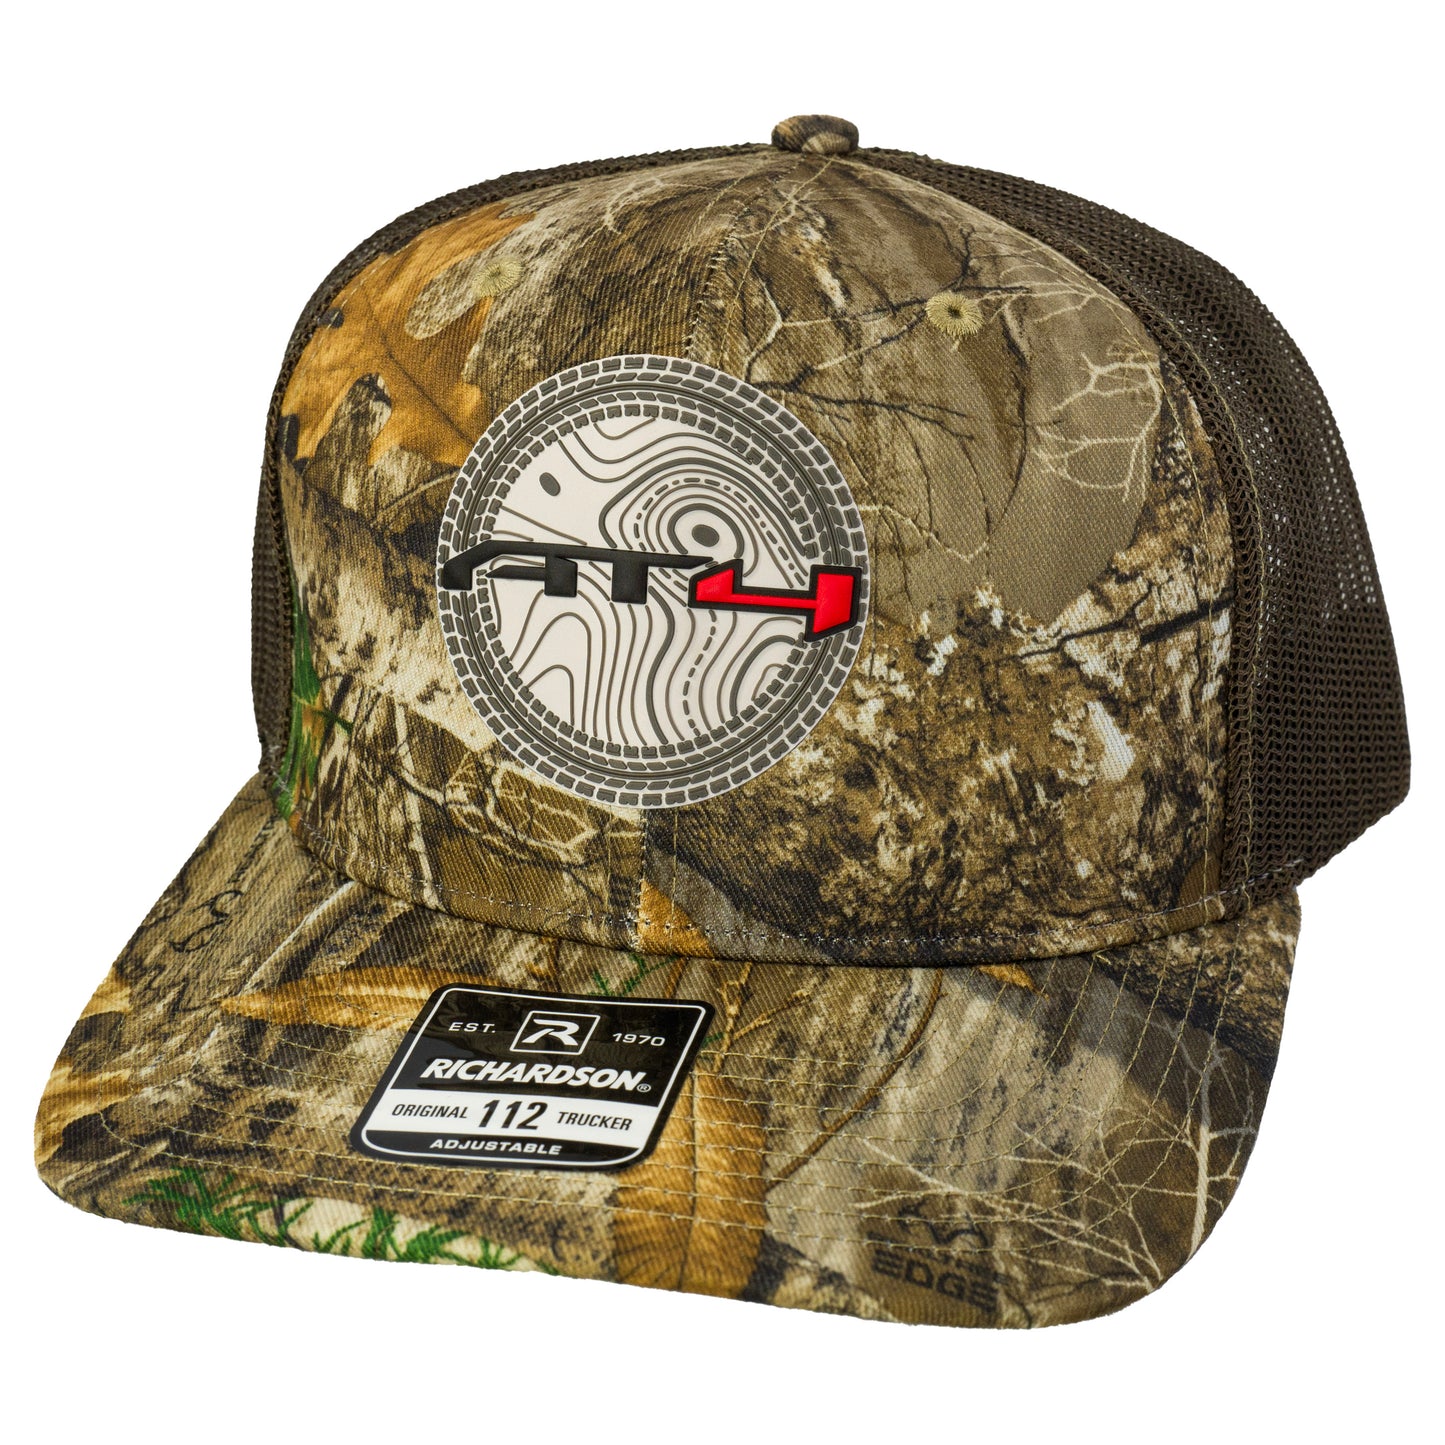 AT4 3D Patterned Snapback Trucker Hat- Realtree Edge/ Brown - Ten Gallon Hat Co.